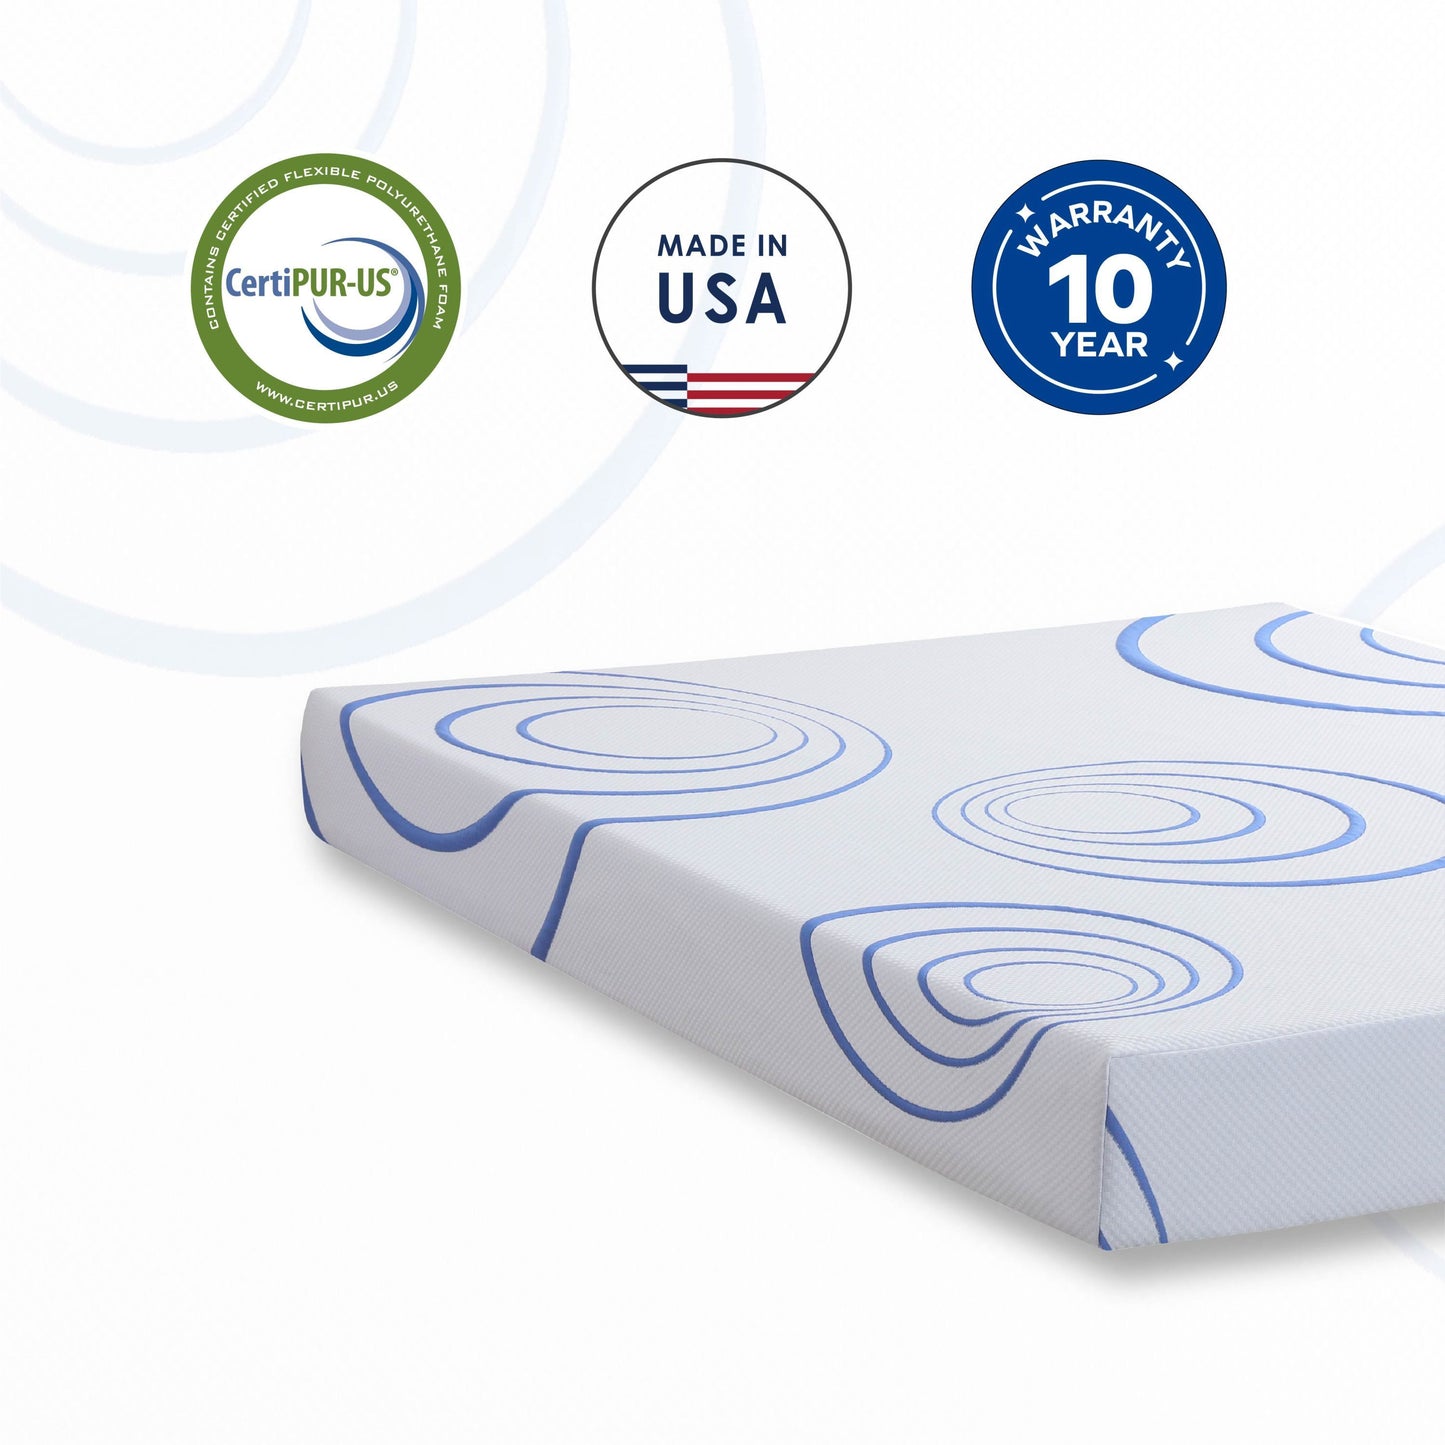 8 Inch Made in USA Bamboo Charcoal Infused Gel Memory Foam Mattress in a Box, CertiPUR-US Certified, TwinXL Mattress with Fiberglass Free Cover, Medium